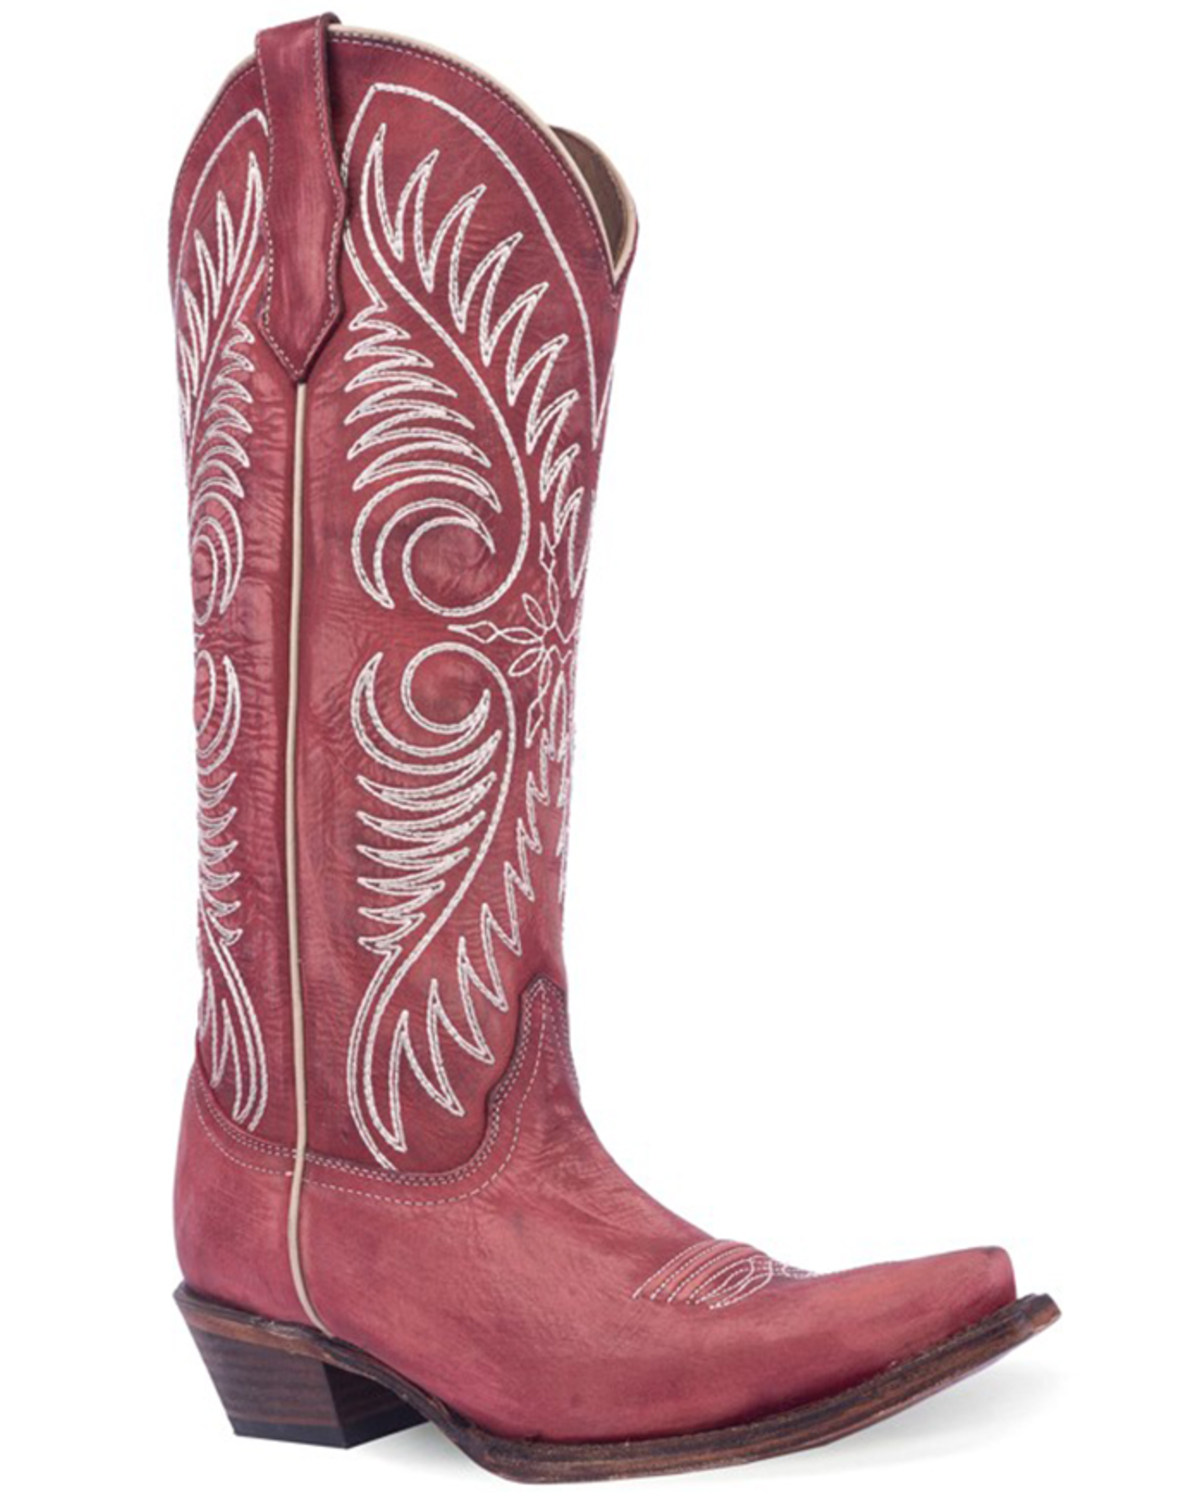 Corral Women's Distressed Tall Western Boots - Snip Toe